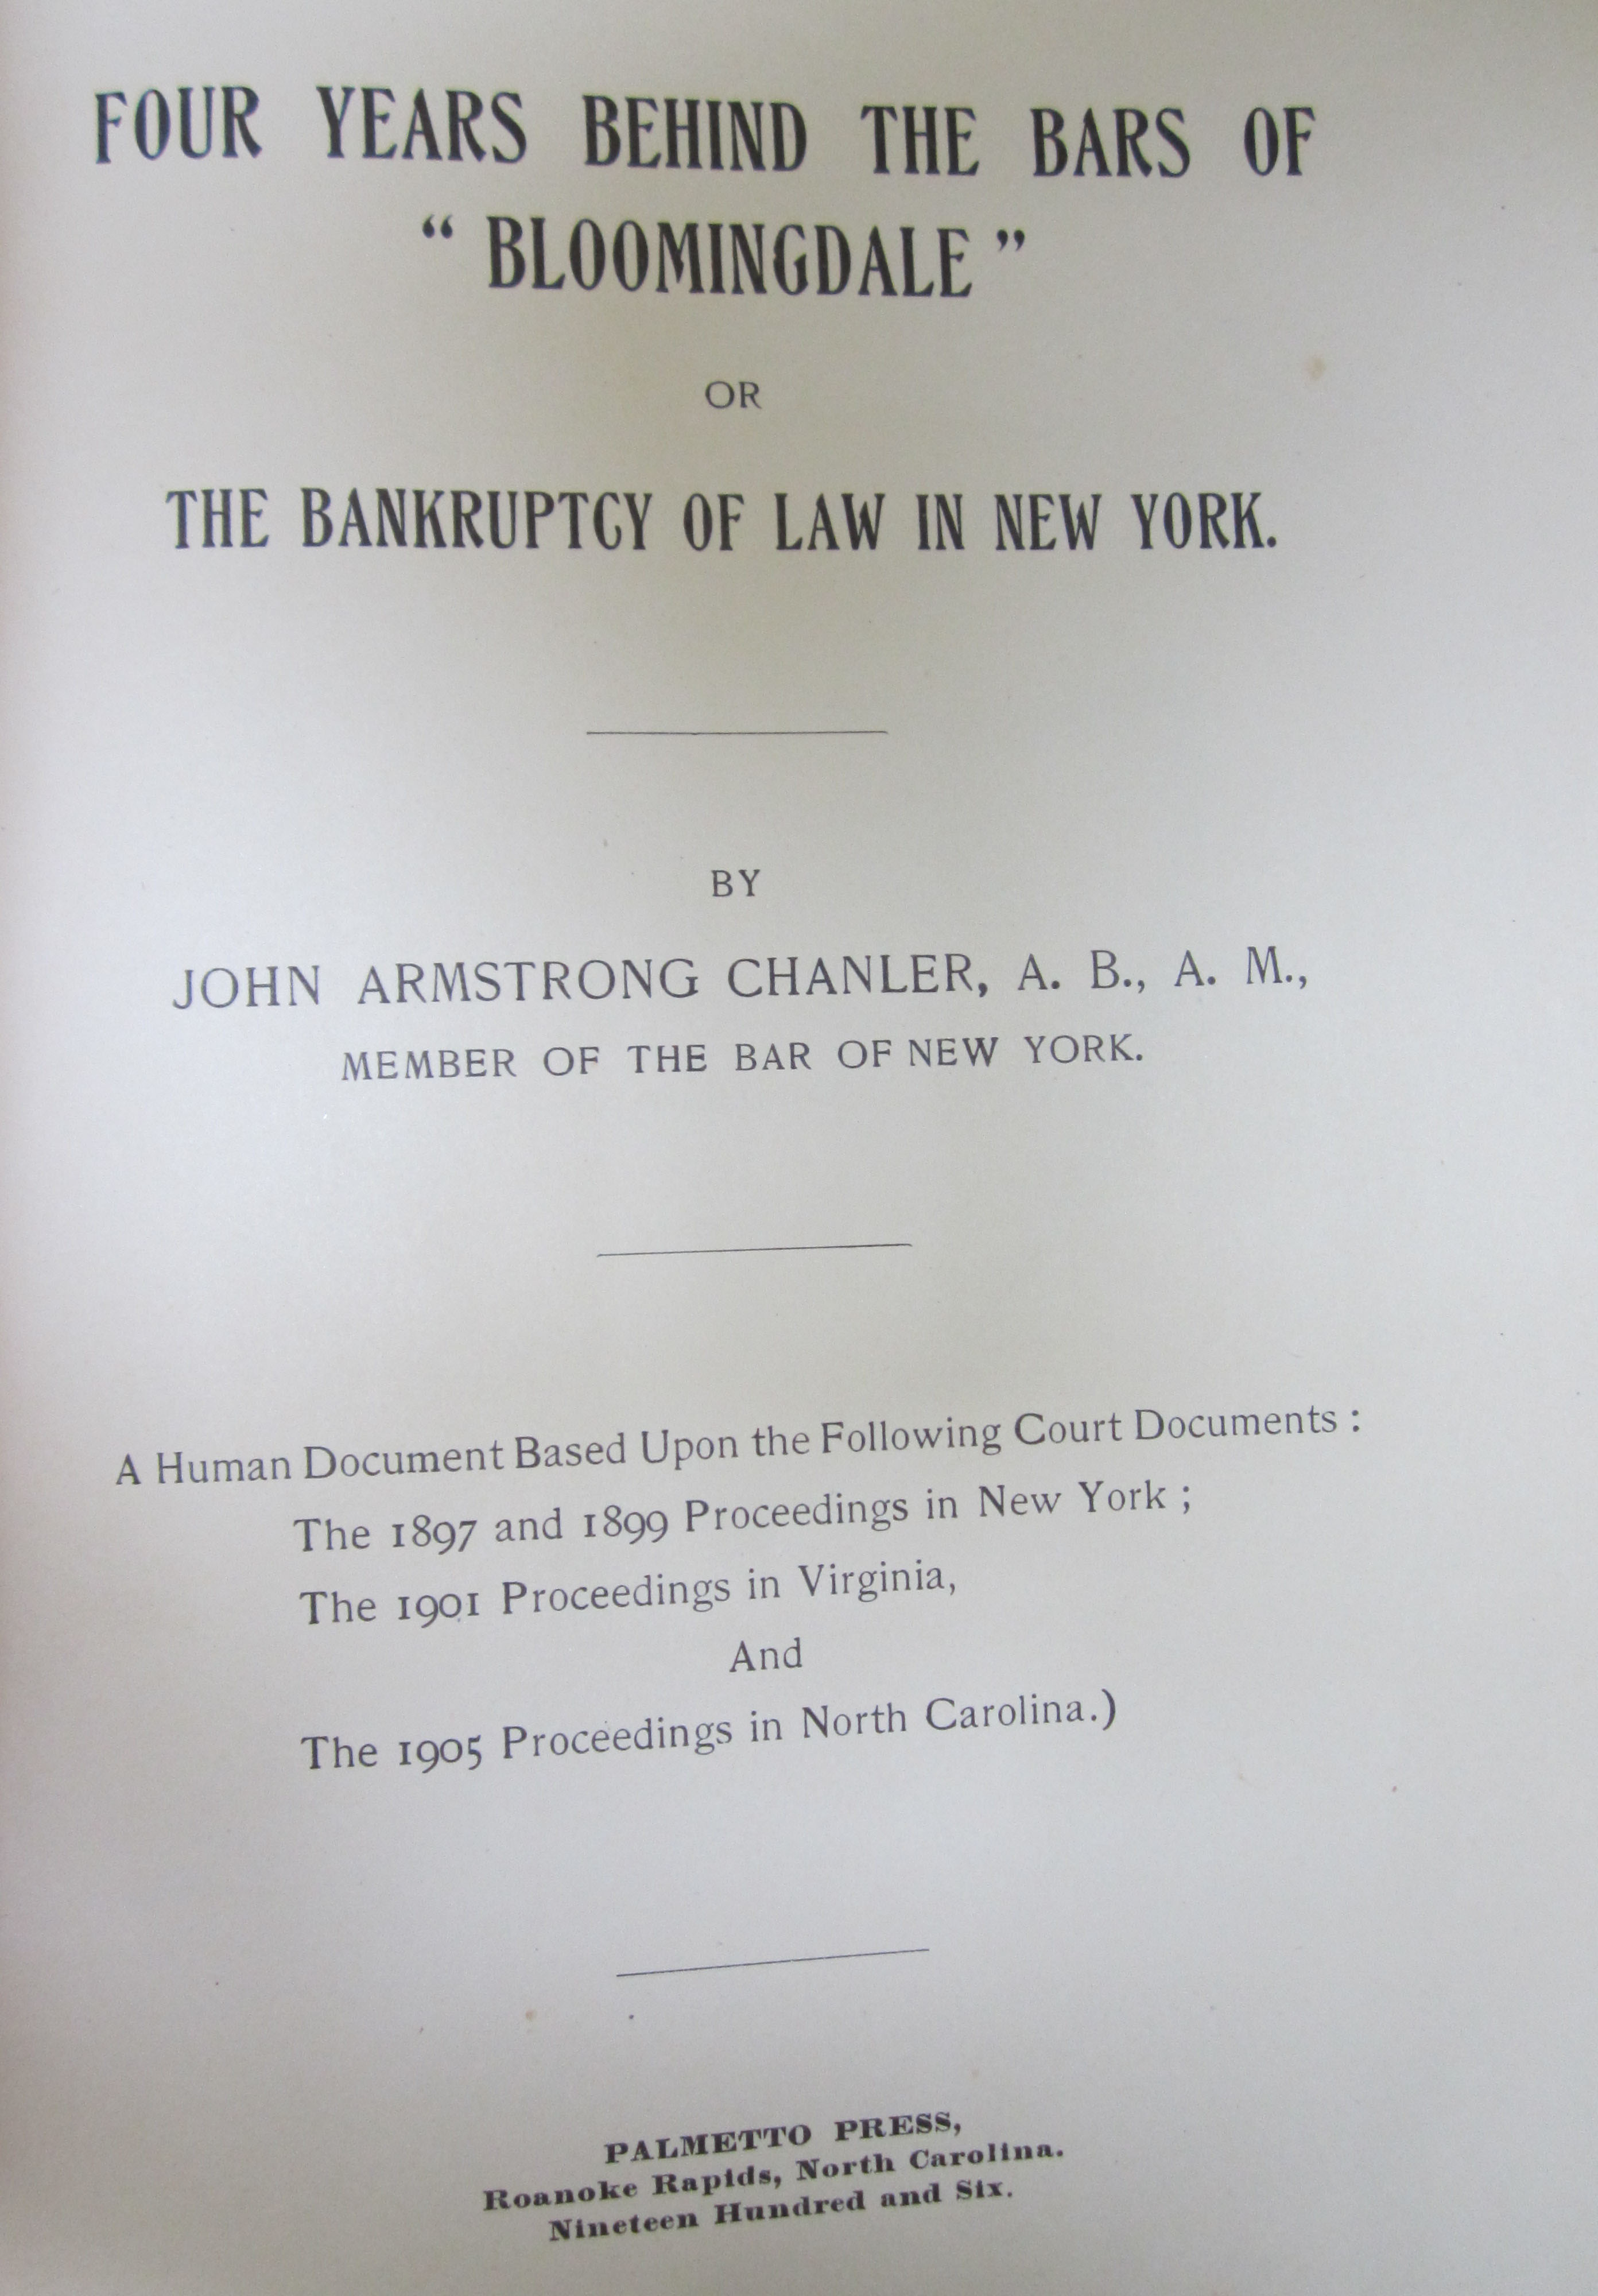 Four Years Behind the Bars of "Bloomingdale" or The Bankruptcy of Law in New York by John Armstrong Chanler, 1906. (PS3505 .H2 F6 1906. Gift of John Staige Davis. Photograph by Donna Stapley)